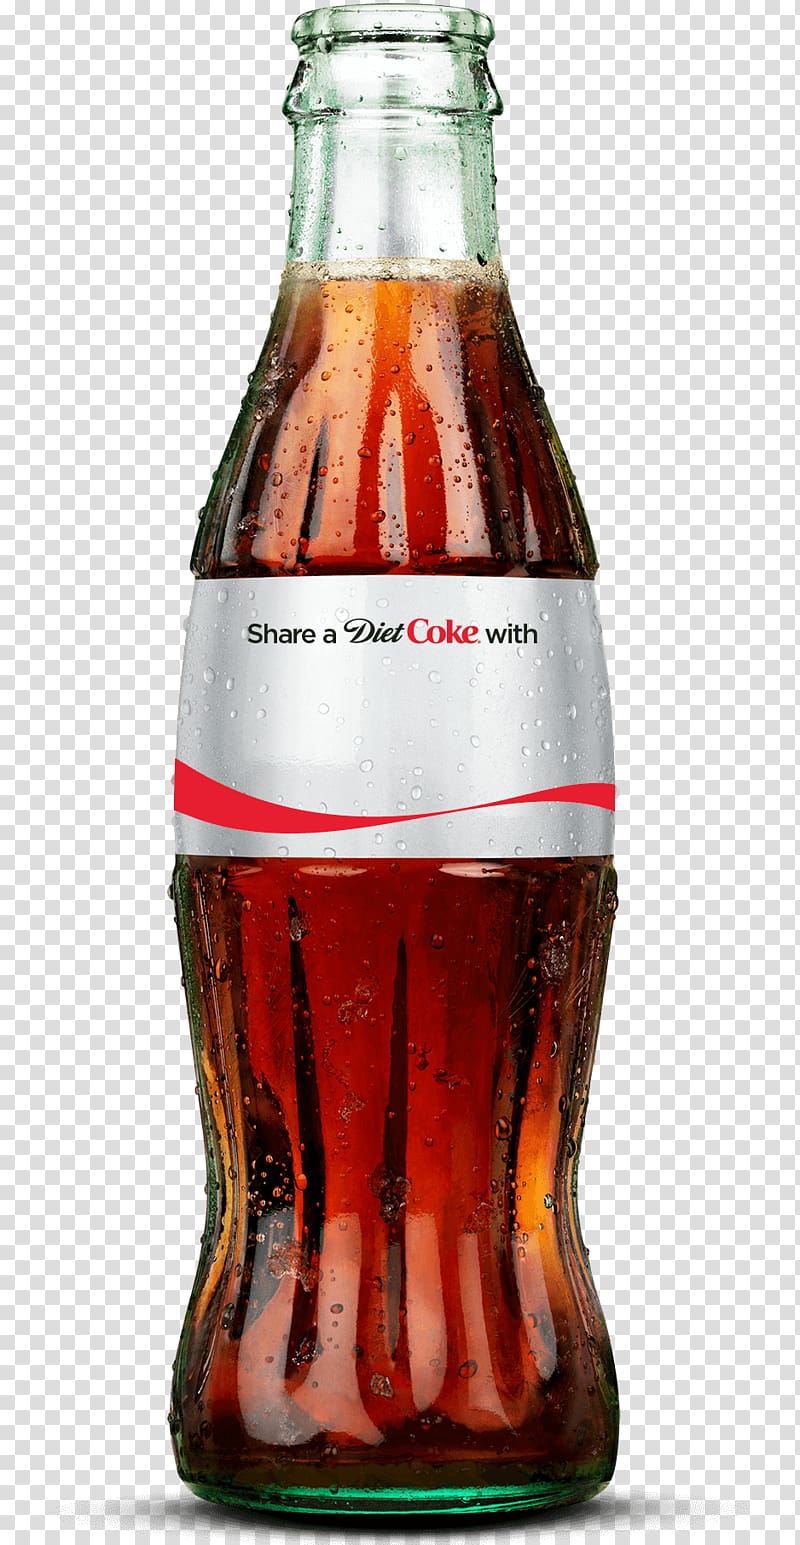 World of Coca-Cola Fizzy Drinks Sprite, tidy up the plastic bottle in the dormitory transparent background PNG clipart